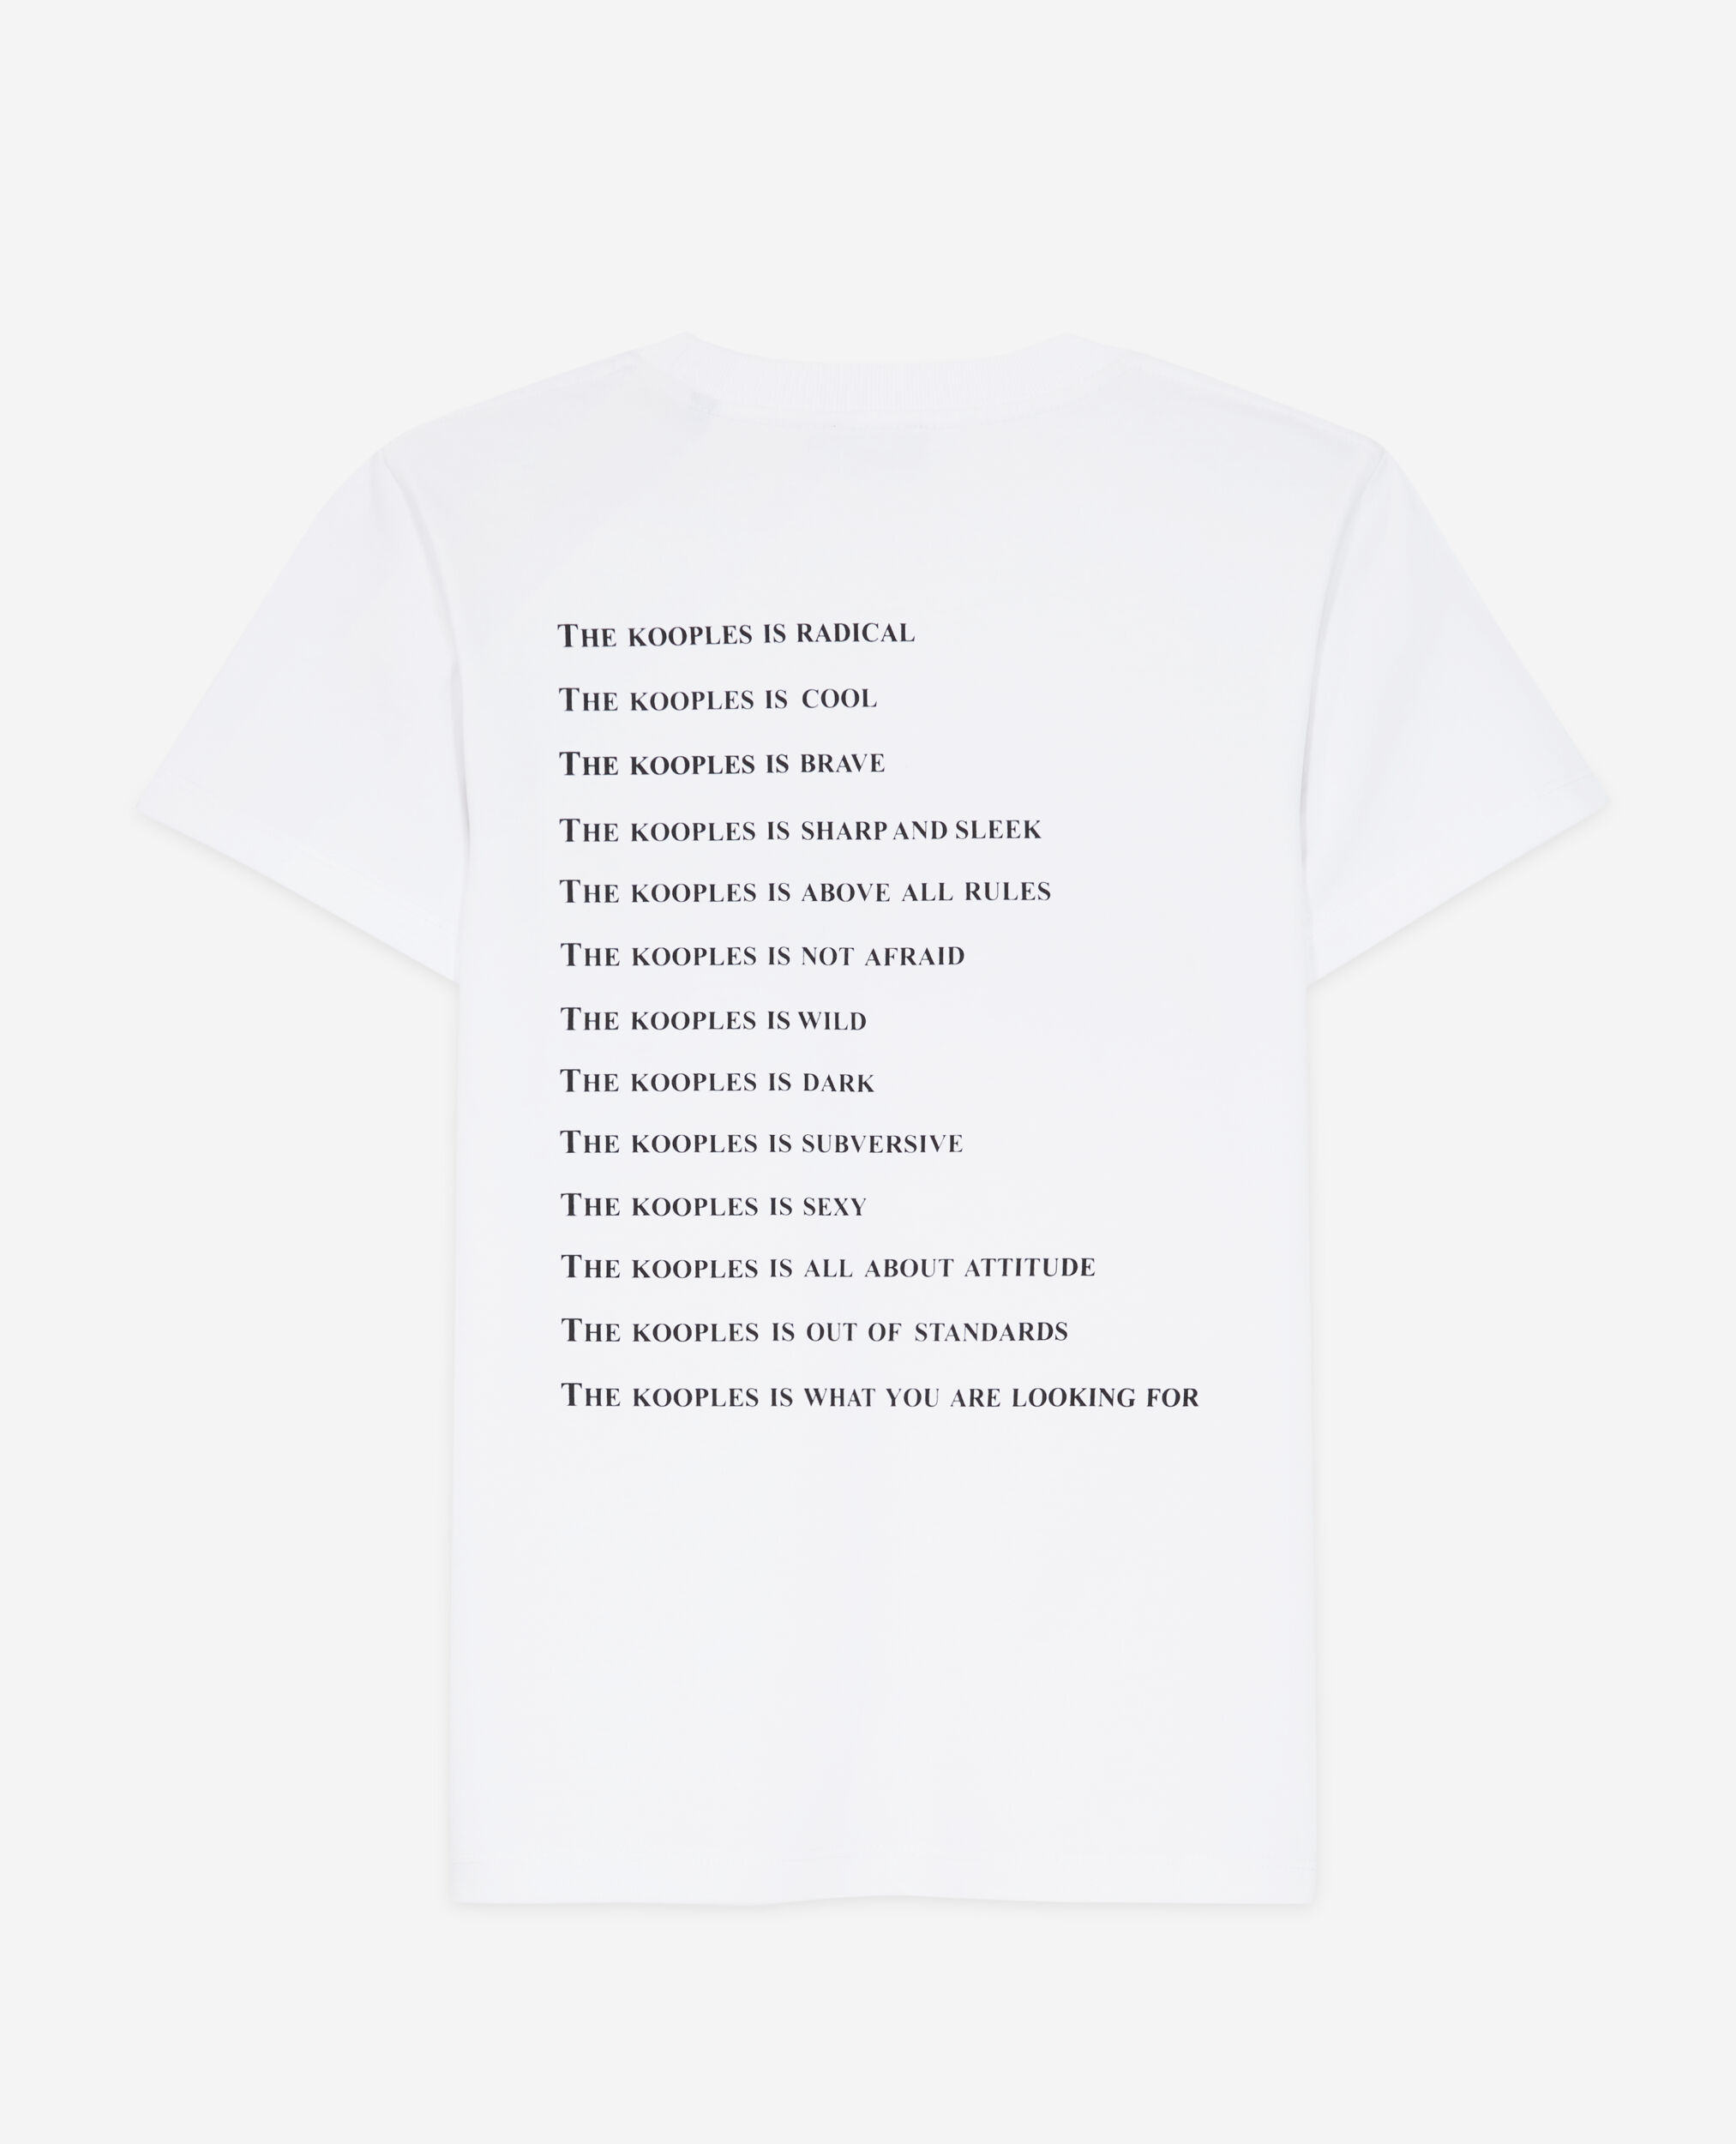 Women's white what is t-shirt, WHITE, hi-res image number null